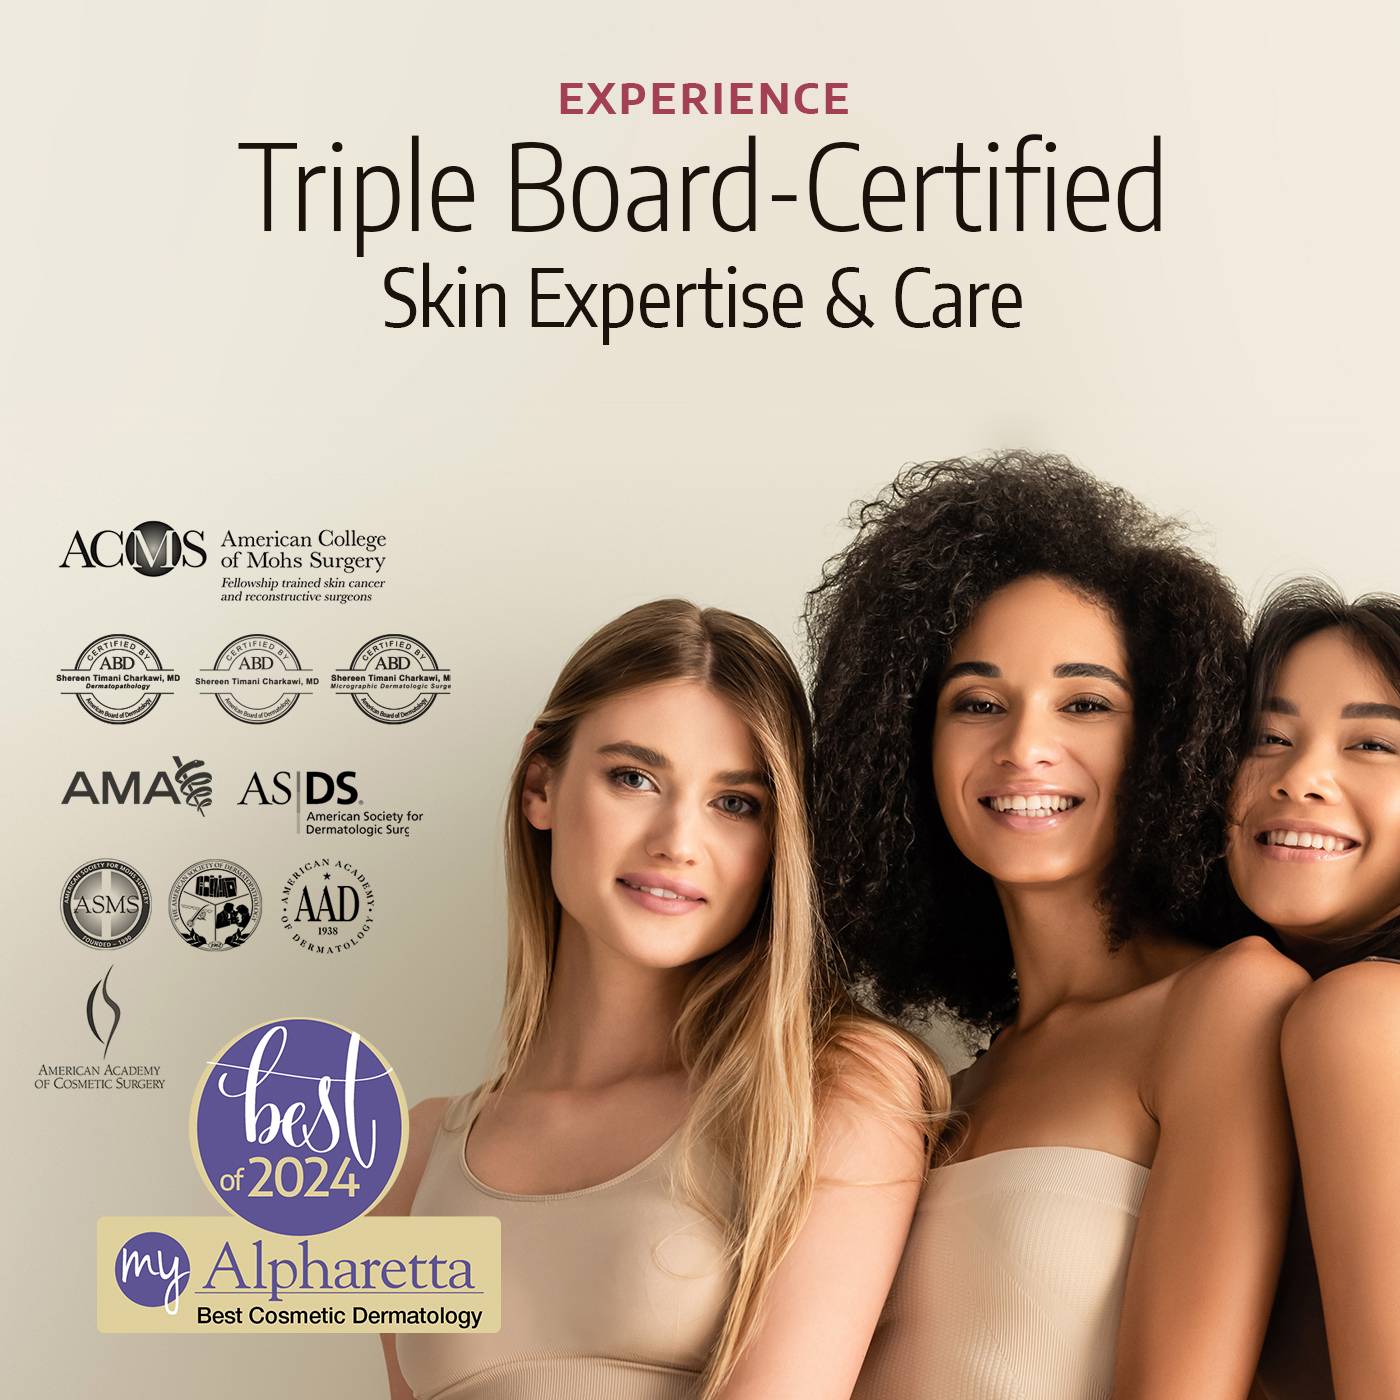  Women—Asian, Caucasian, and Black—standing together with beautiful, youthful, and healthy skin, thanks to expert skin care...  